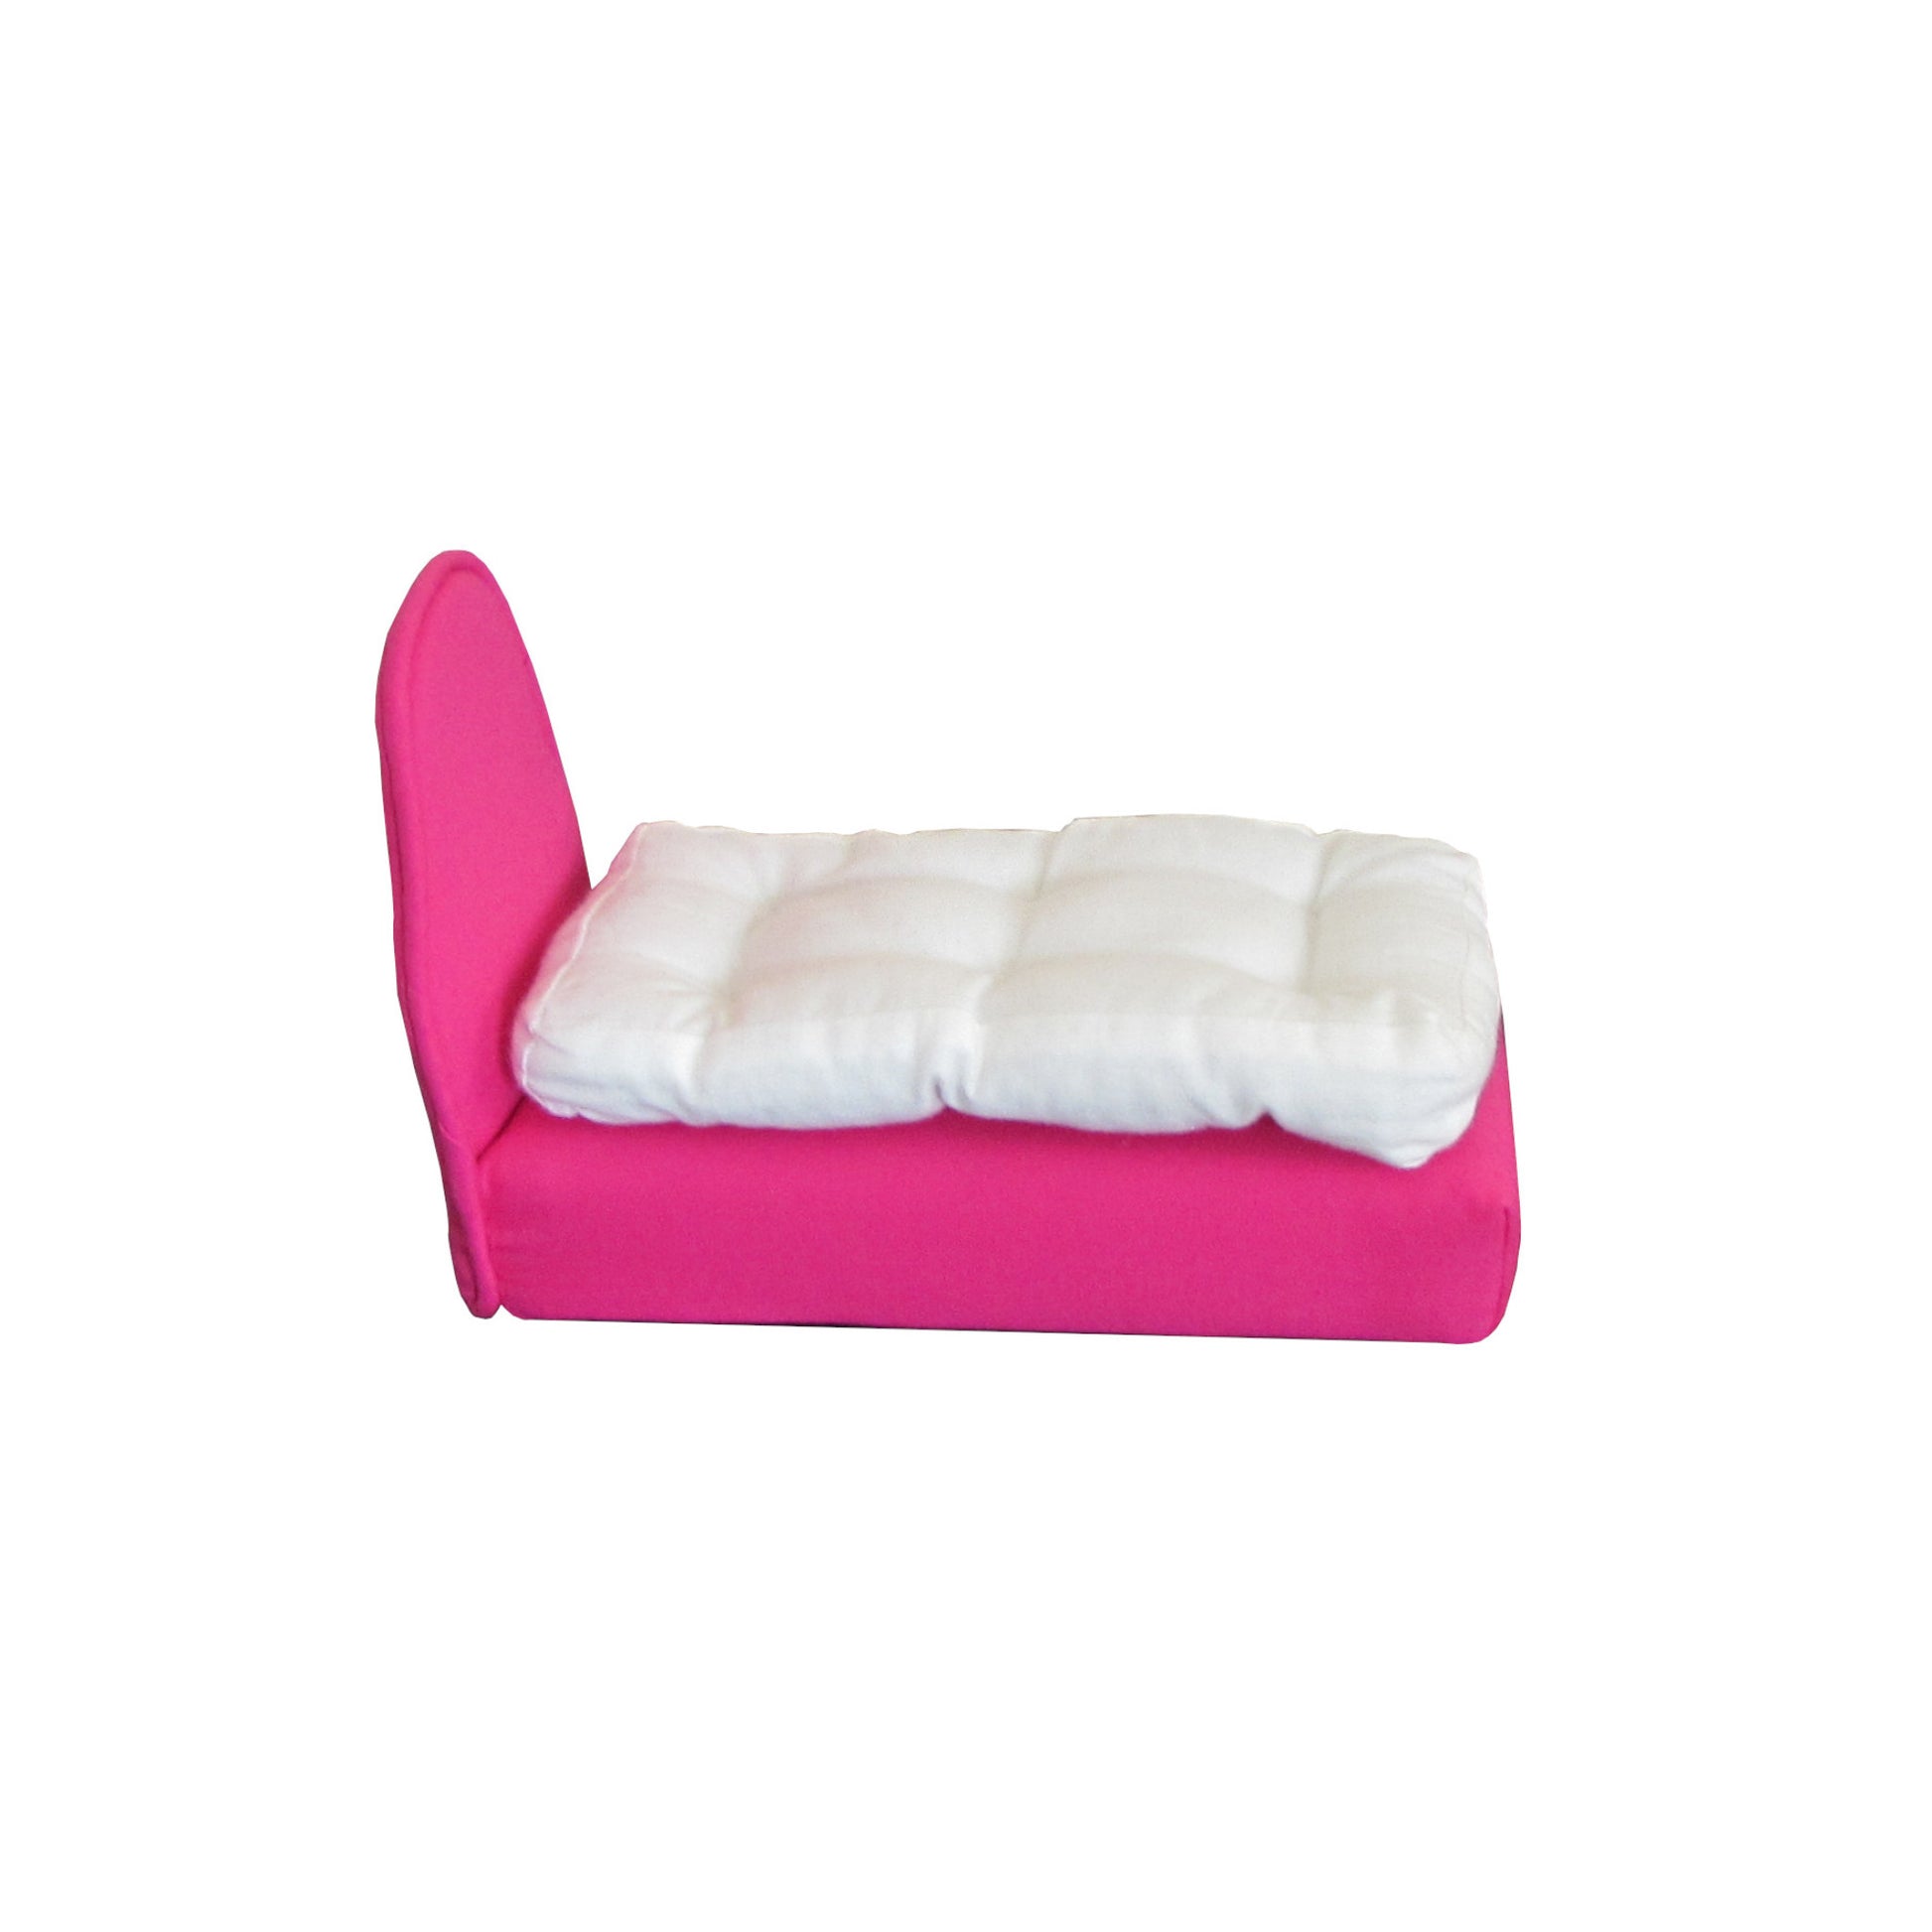 Upholstered Bright Pink Doll BEd and Mattress for 6.5-inch dolls